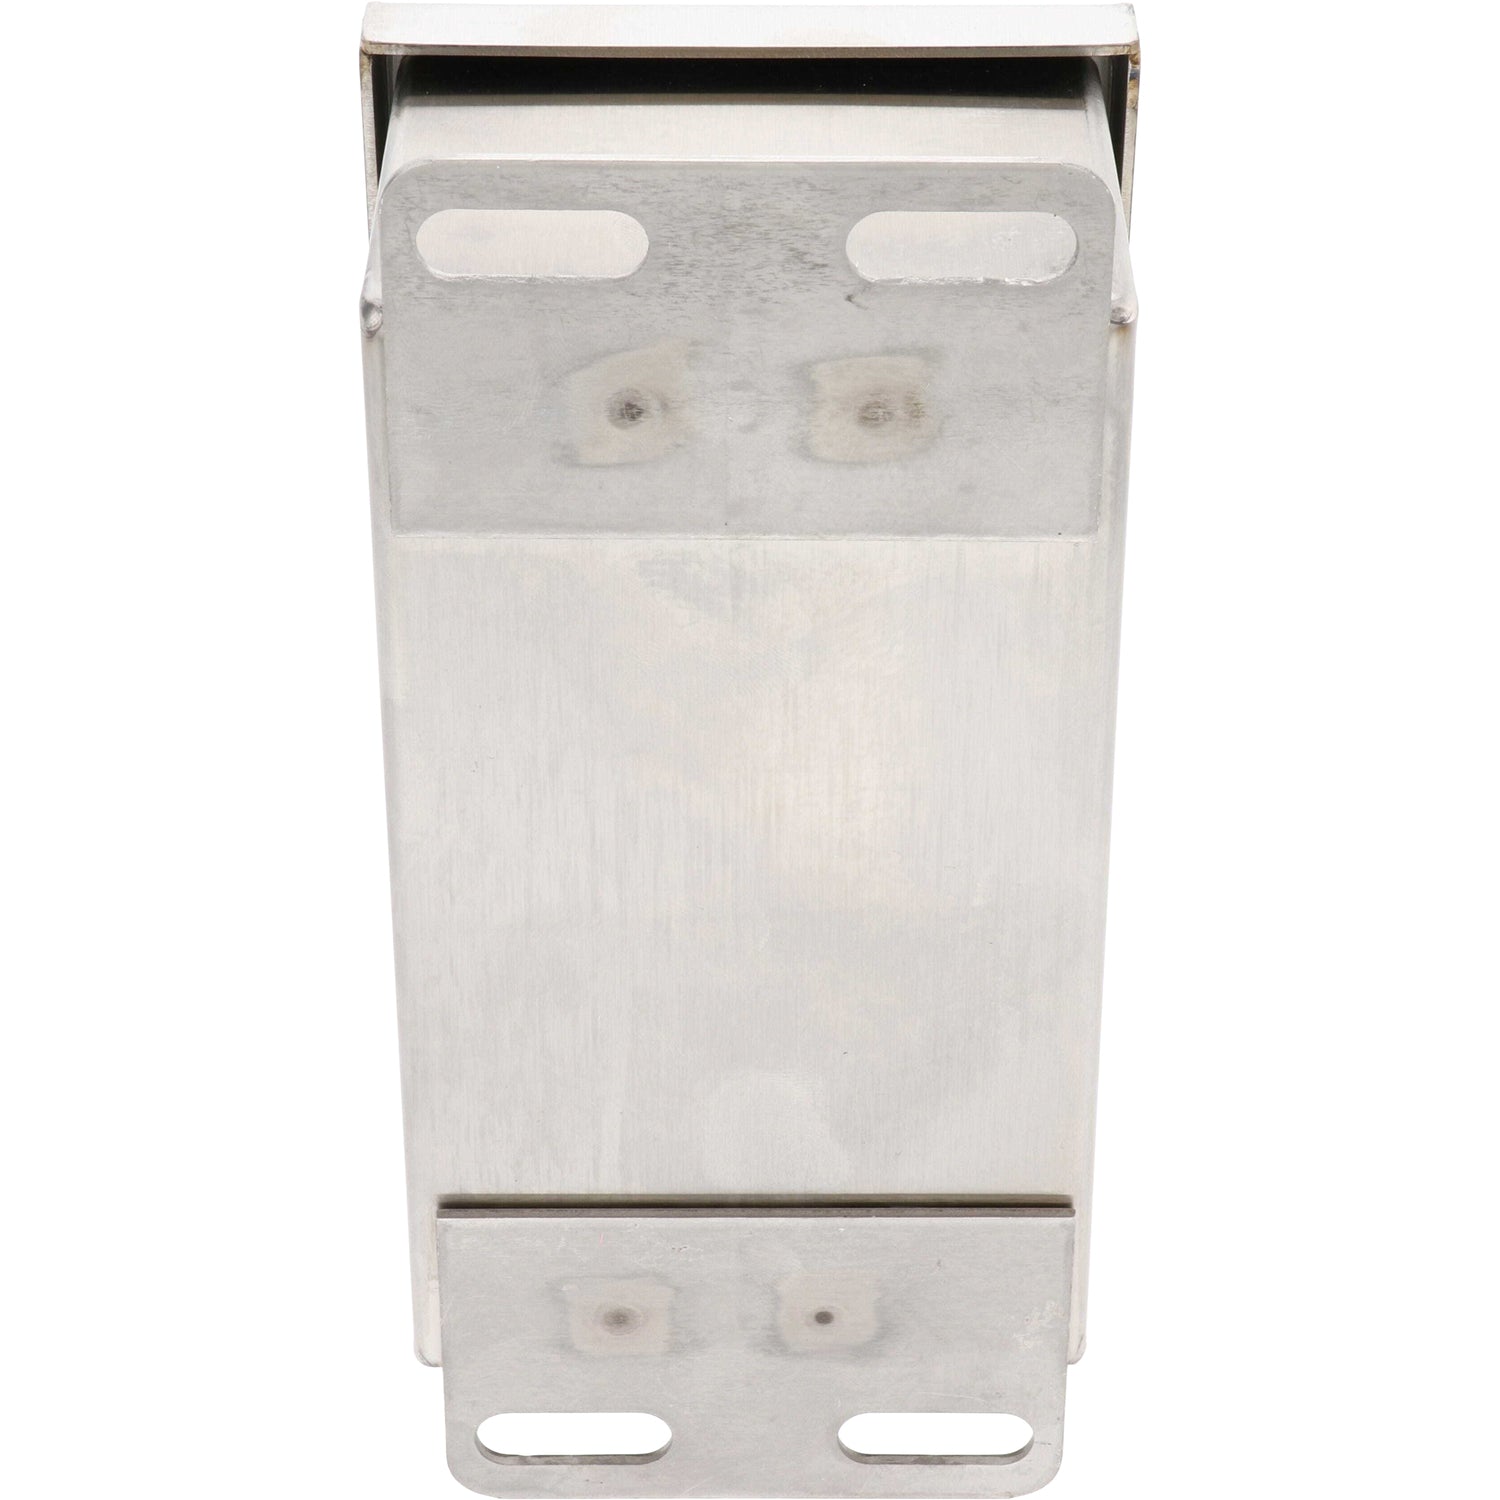 Backside of rectangular stainless steel box with four slotted mounting holes, shown on a white background. 